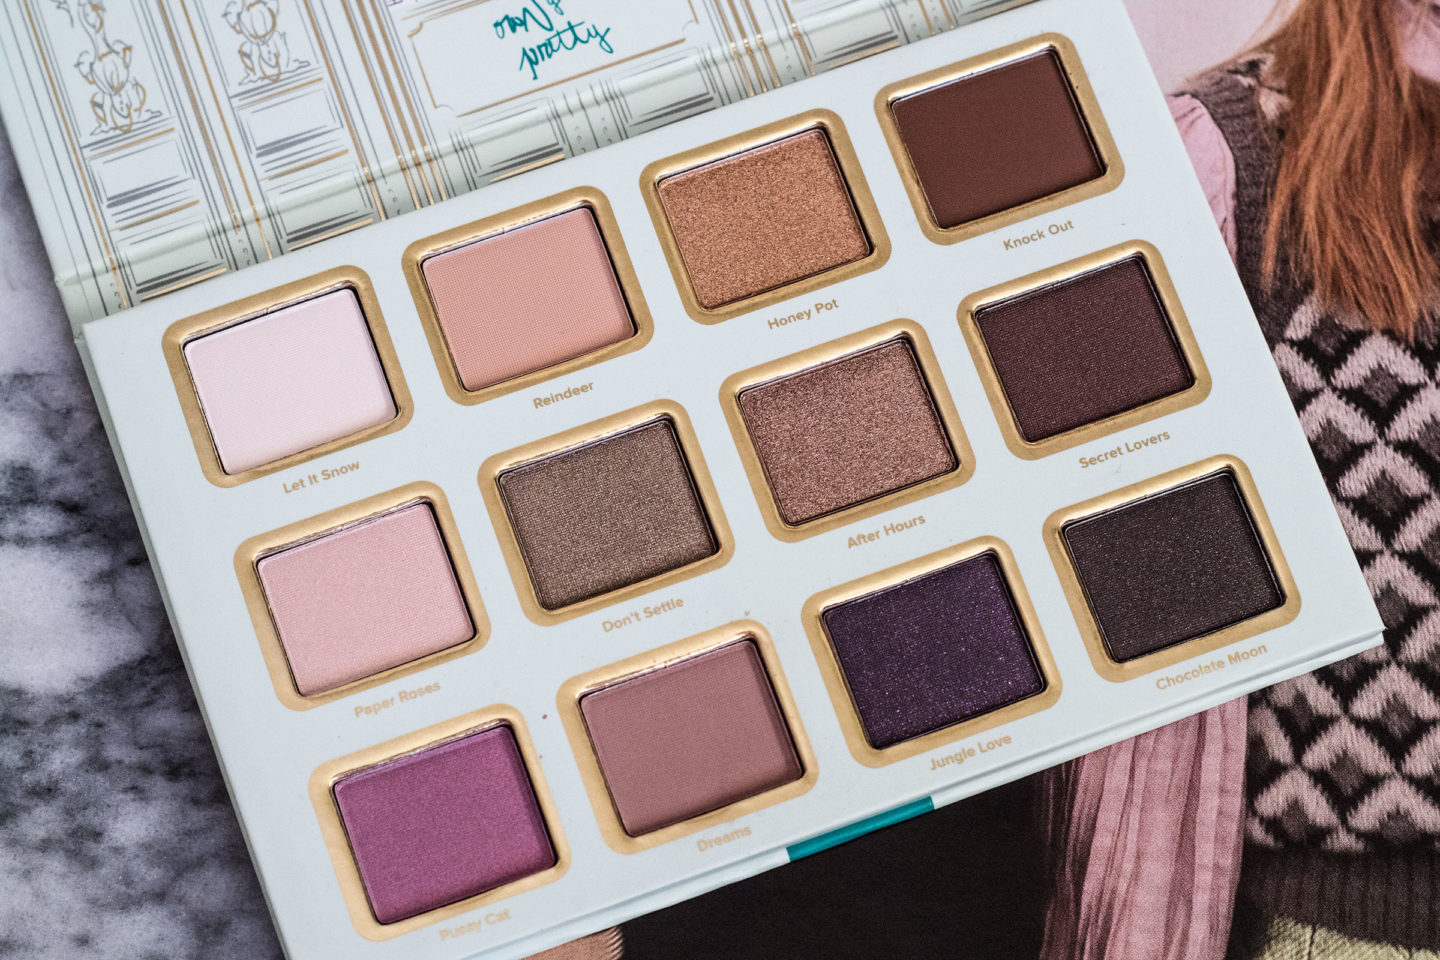 The Beauty Vanity Too Faced La Petite Maison Review Swatches 